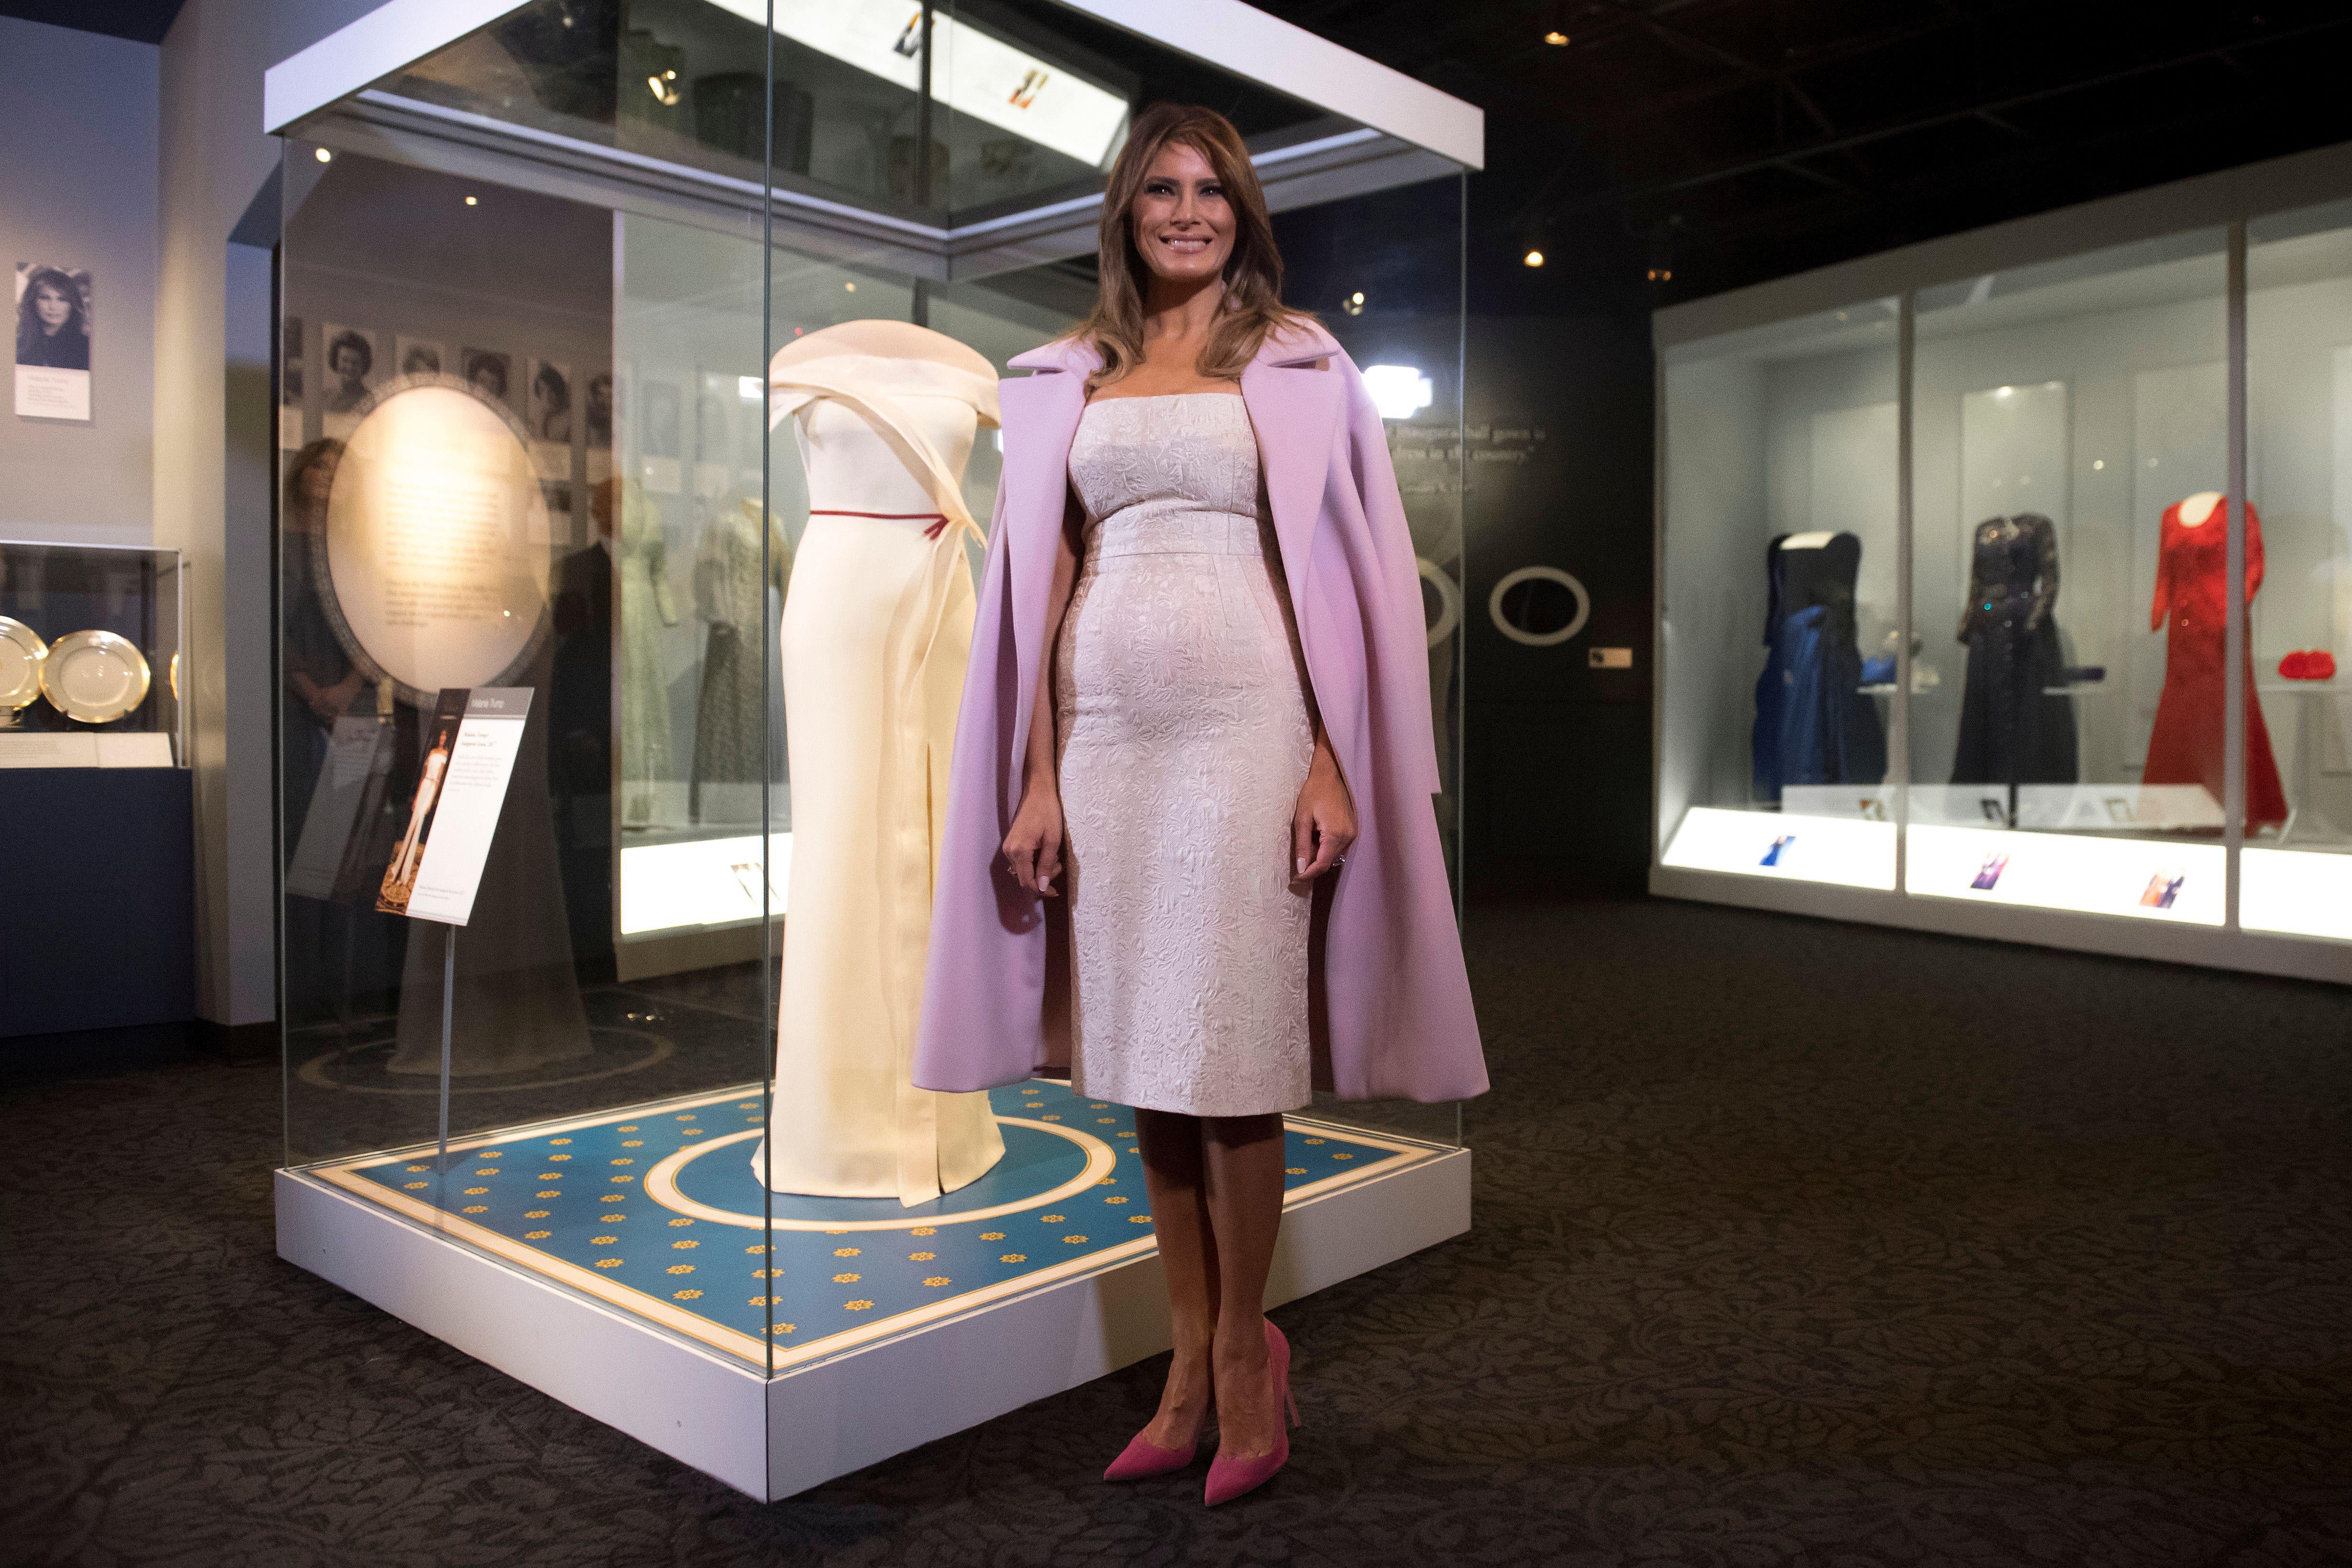 US First Lady Melania Trump stands alongside the gown she wore to the 2017 inaugural balls as she donates the dress to the Smithsonian's First Ladies Collection at the Smithsonian National Museum of American History in Washington, DC, October 20, 2017. / AFP PHOTO / SAUL LOEB        (Photo credit should read SAUL LOEB/AFP/Getty Images)